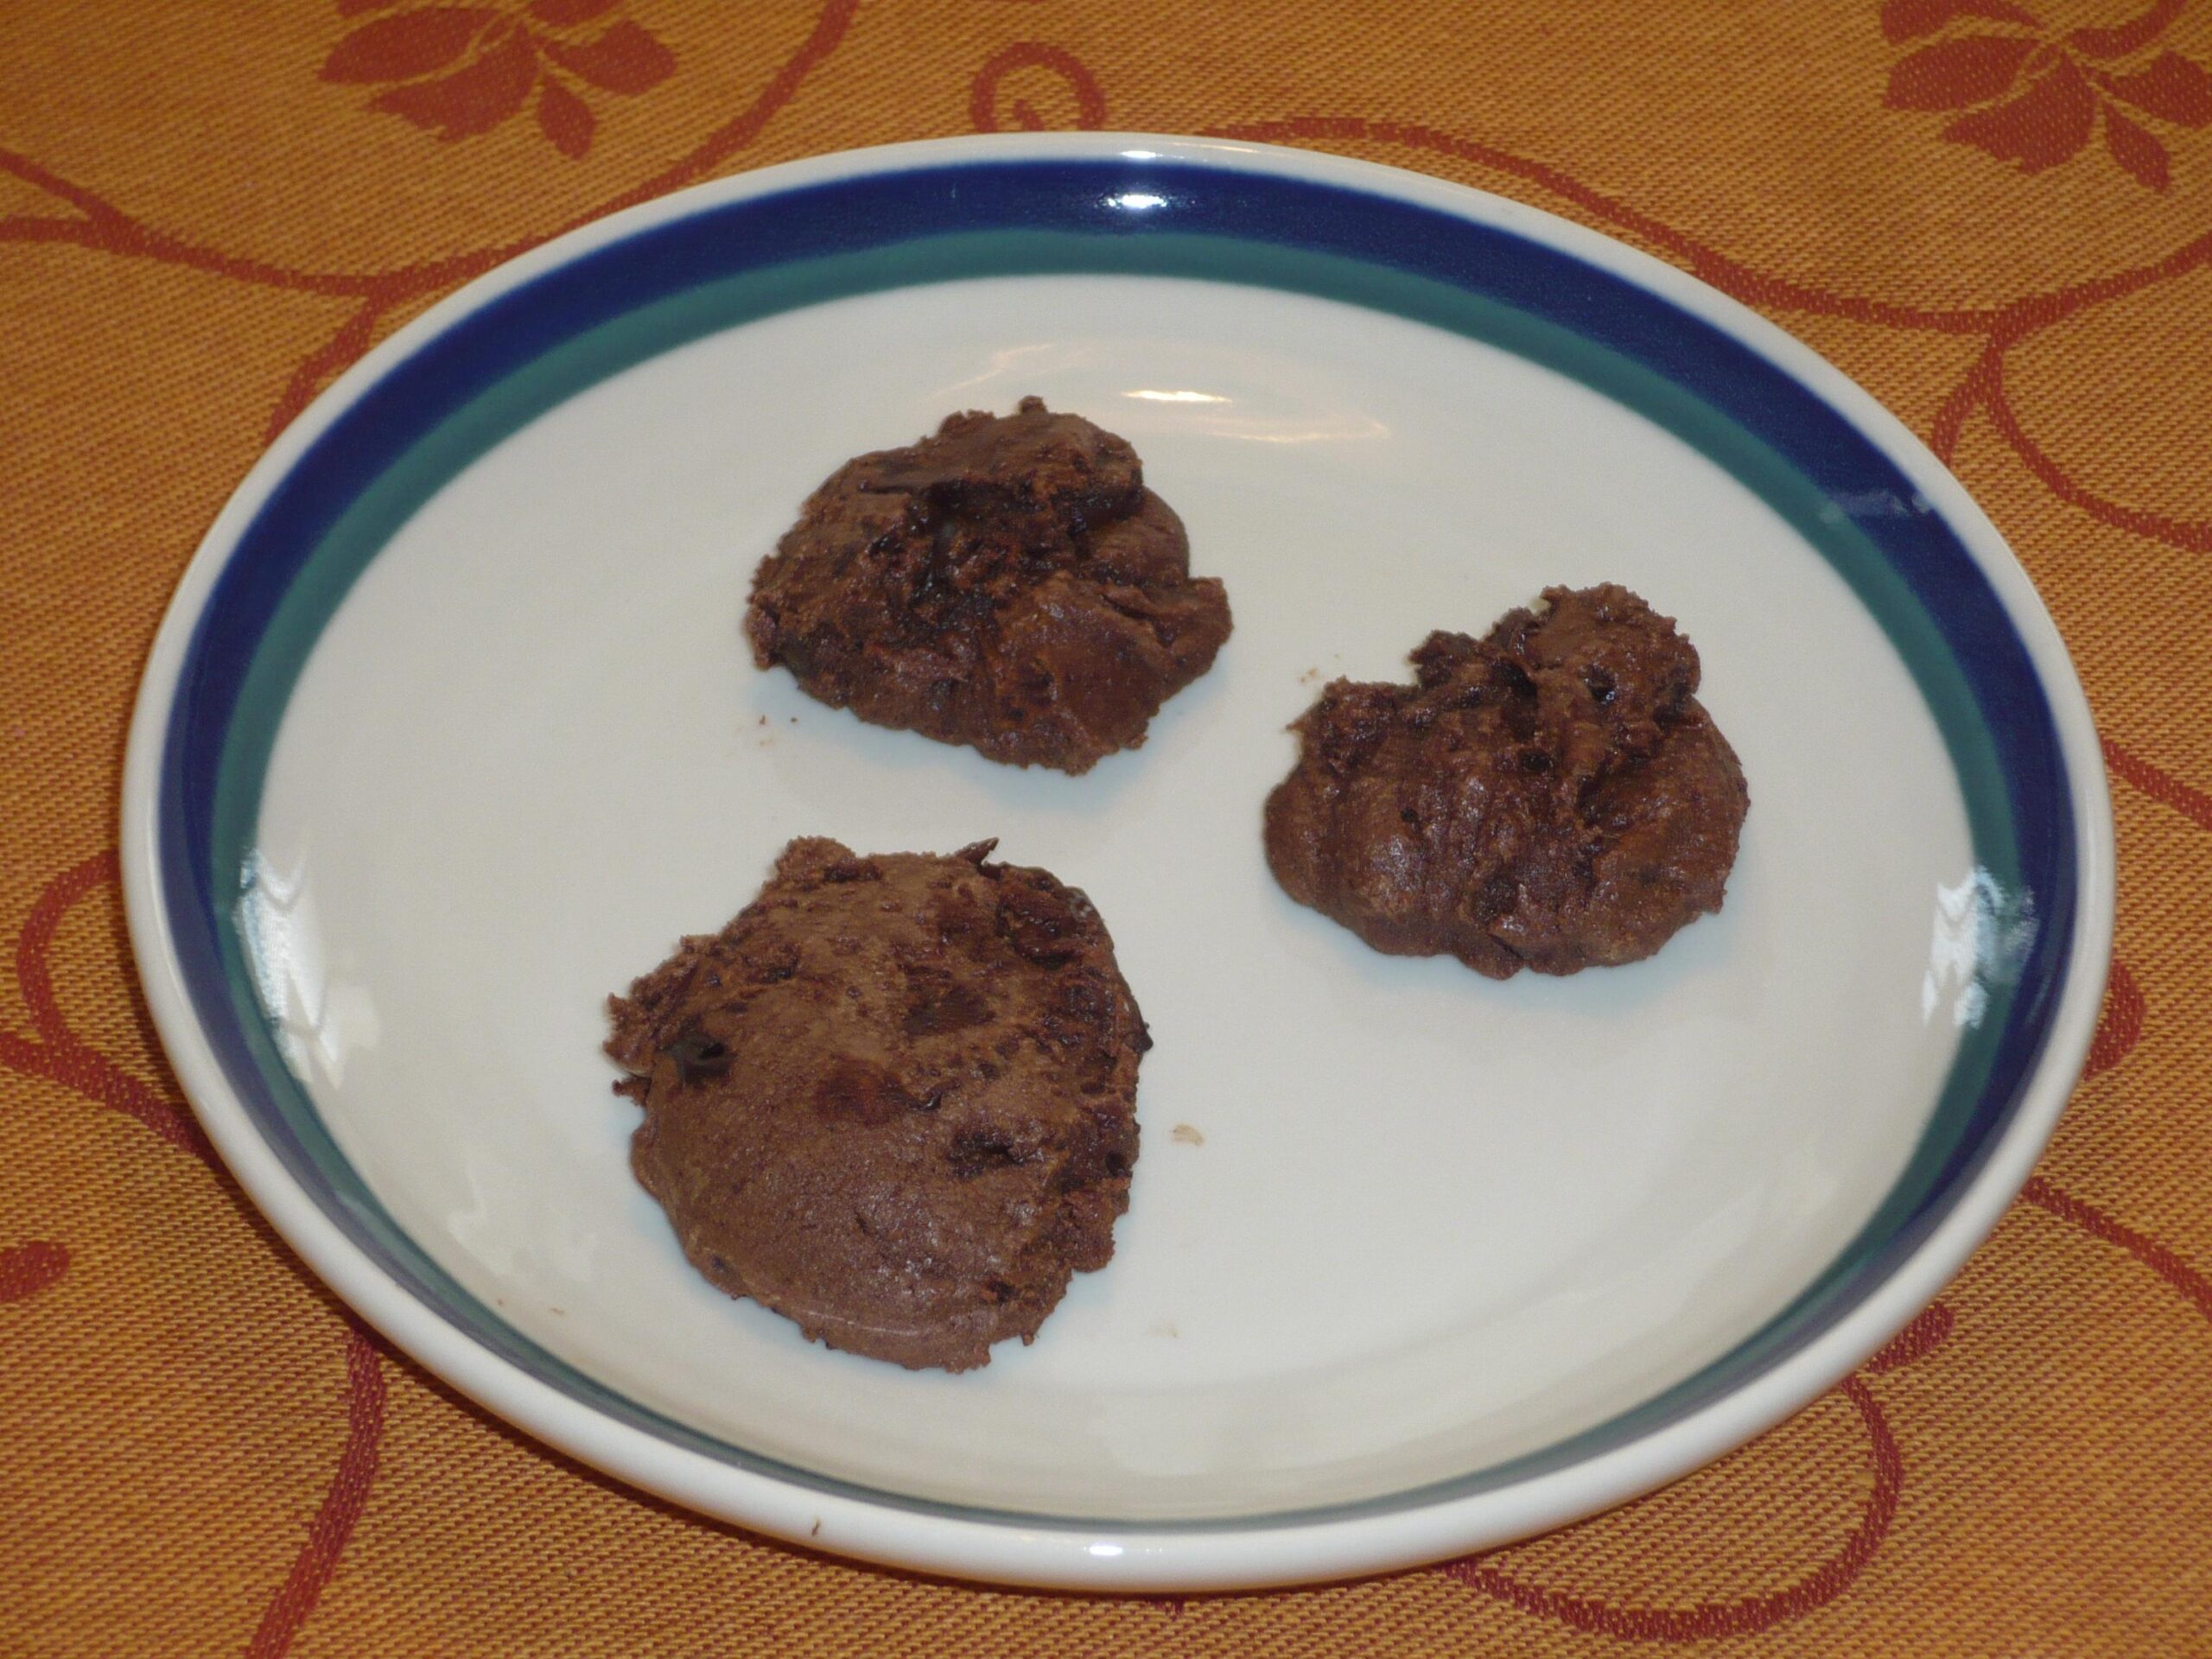  Get ready to indulge in some chocolatey goodness with these gluten-free fudge cookies!